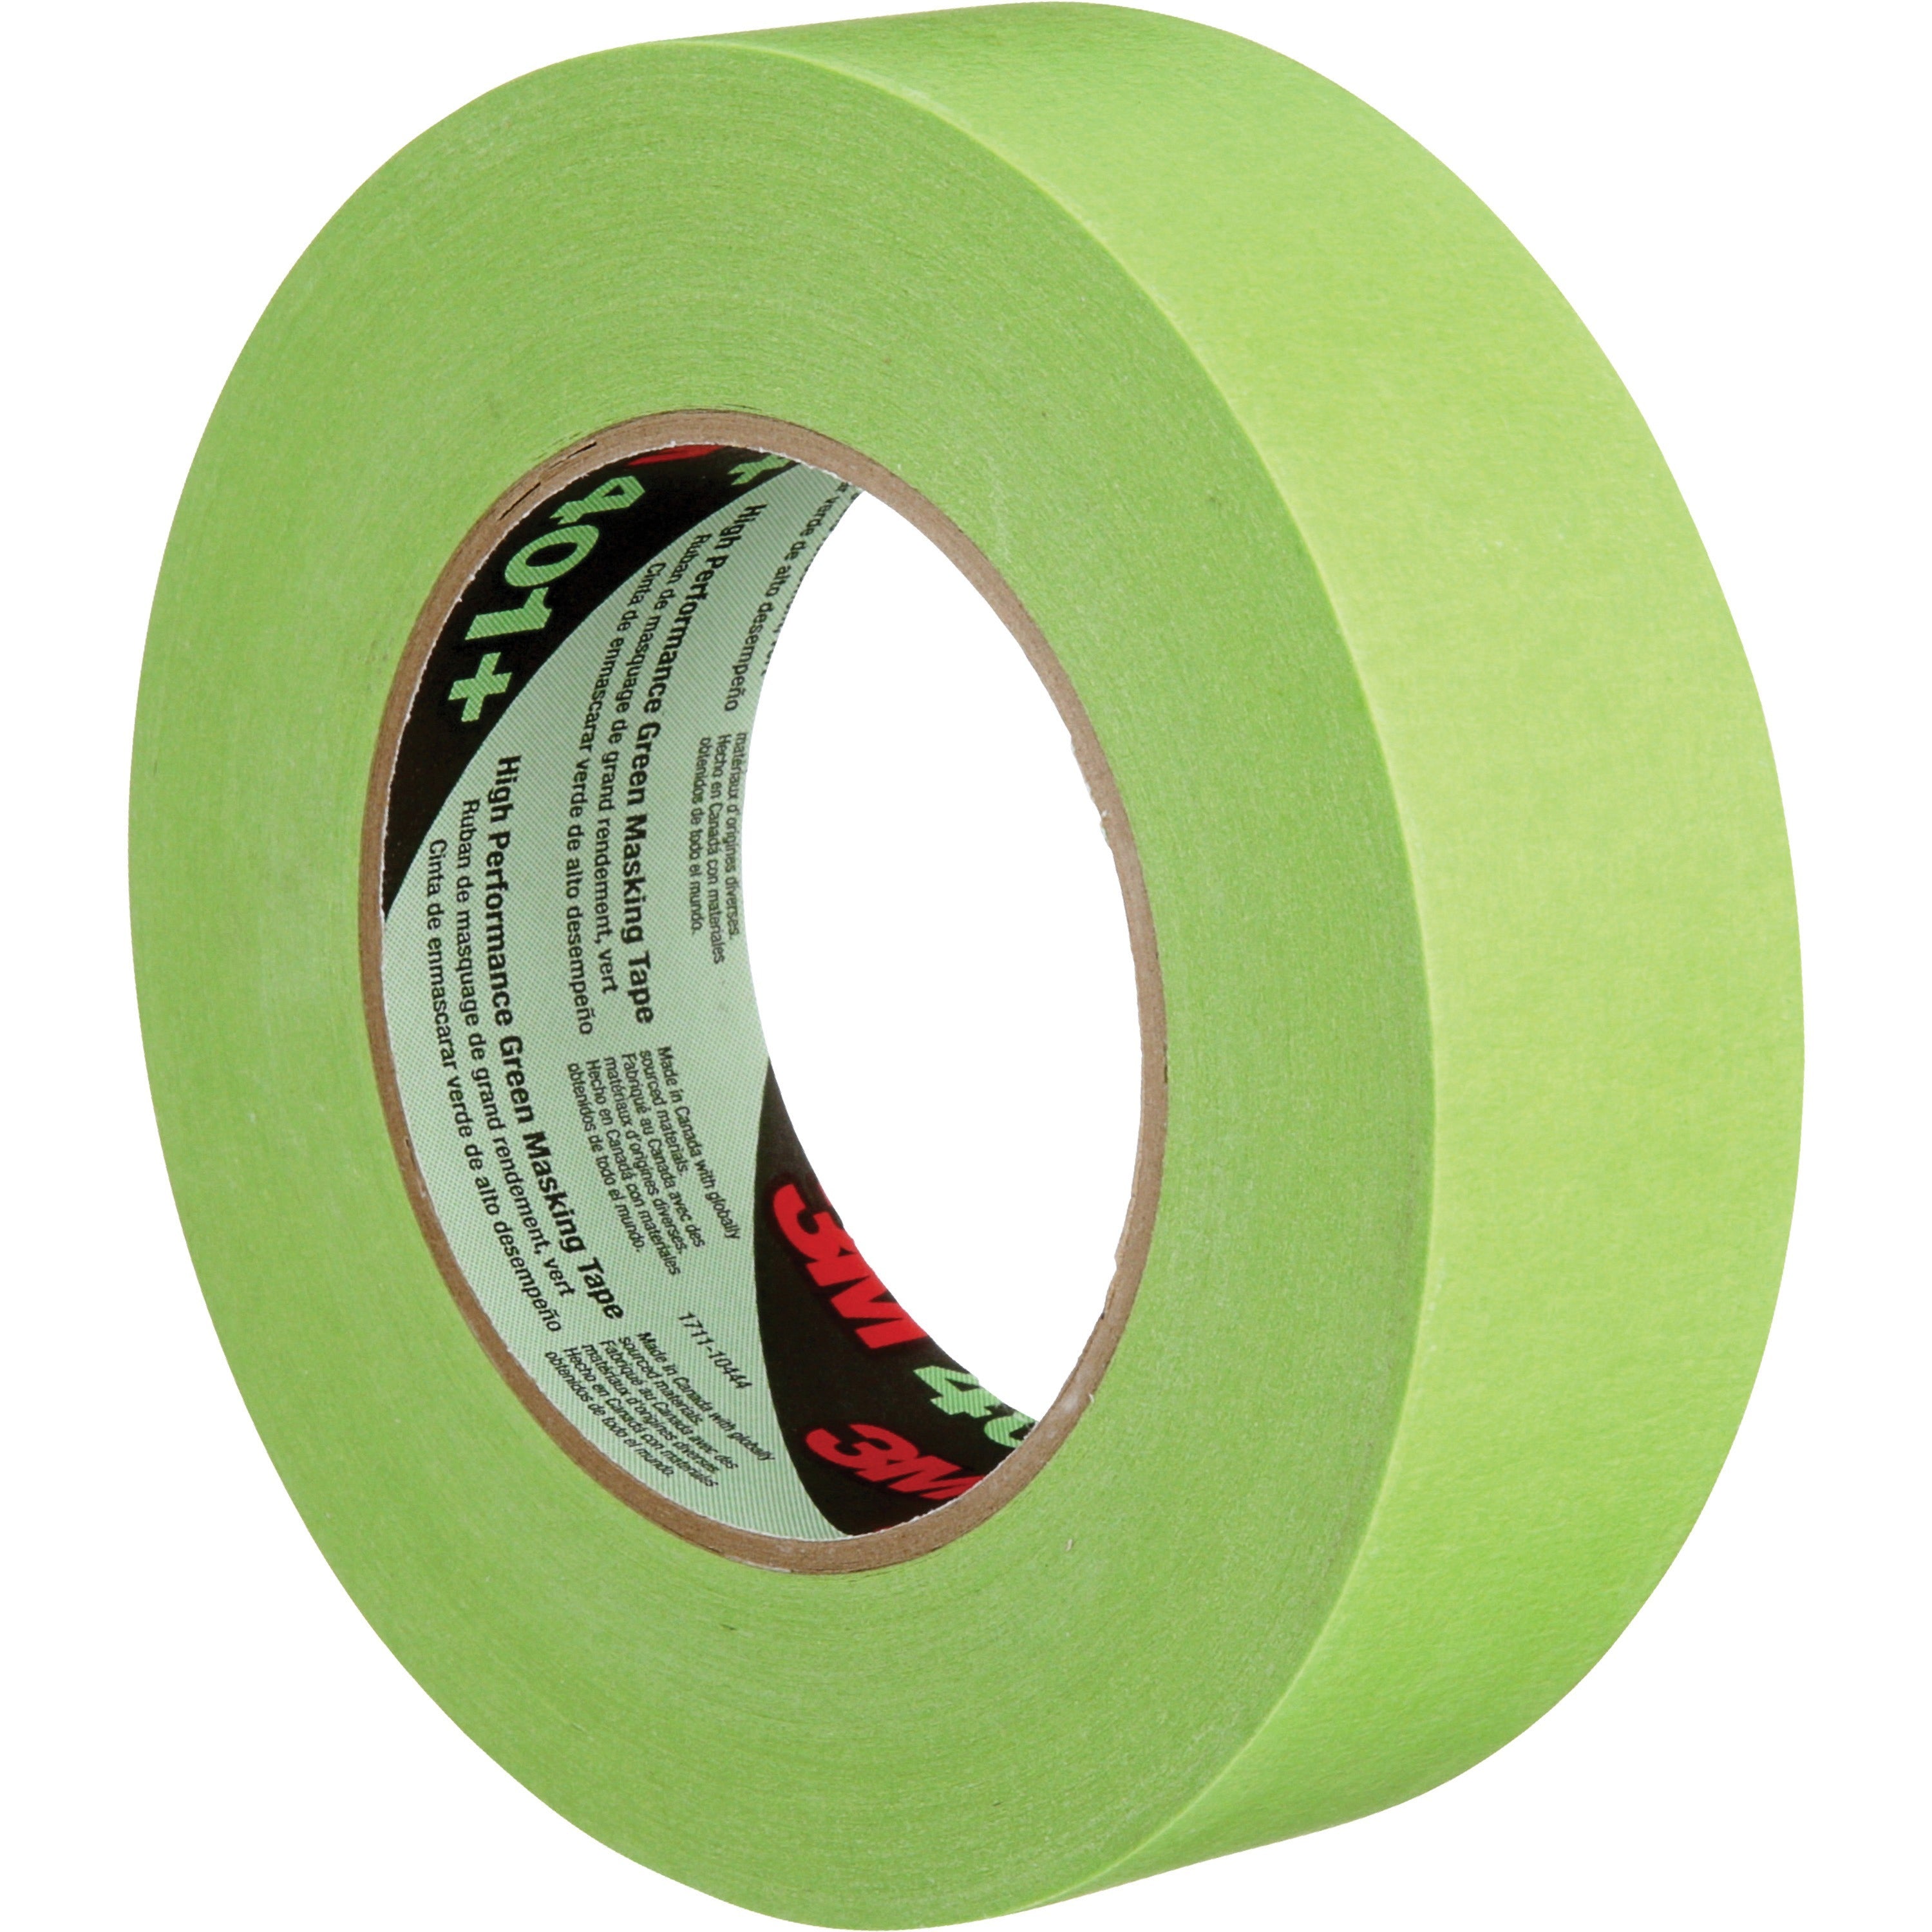 3m-401+-high-performance-green-masking-tape-crepe-paper-synthetic-rubber-backing-1-roll-green_mmm40124x55 - 1